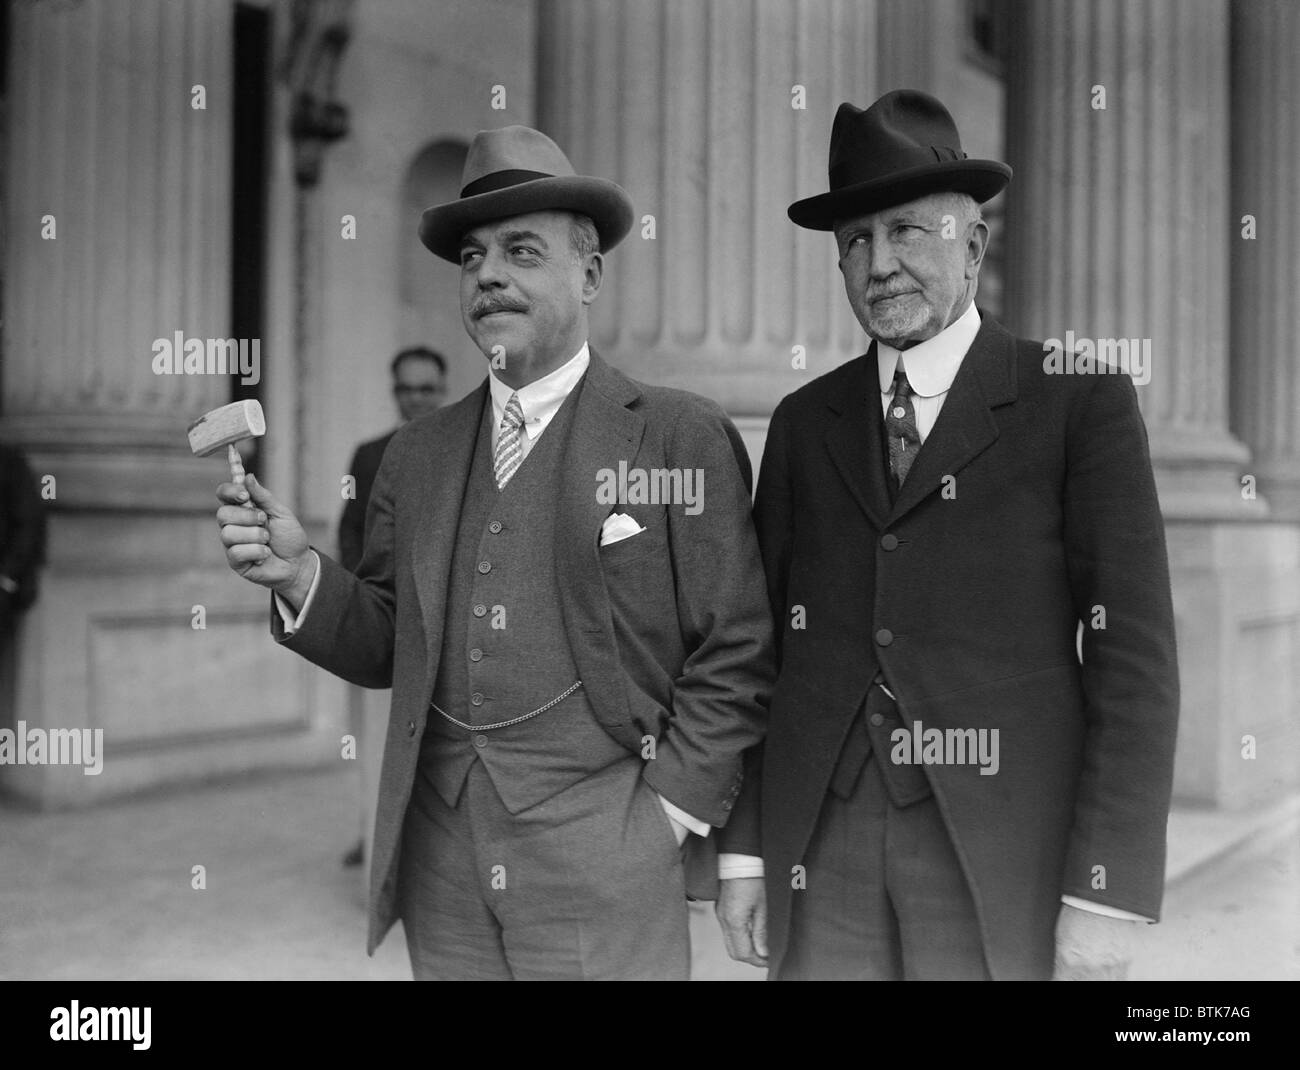 Frederick Gillette, leaving his position as Speaker of the House of Representative for a Senate seat, hands his gavel to Nicholas Longworth, the new Speaker. Feb. 28, 1925. Stock Photo